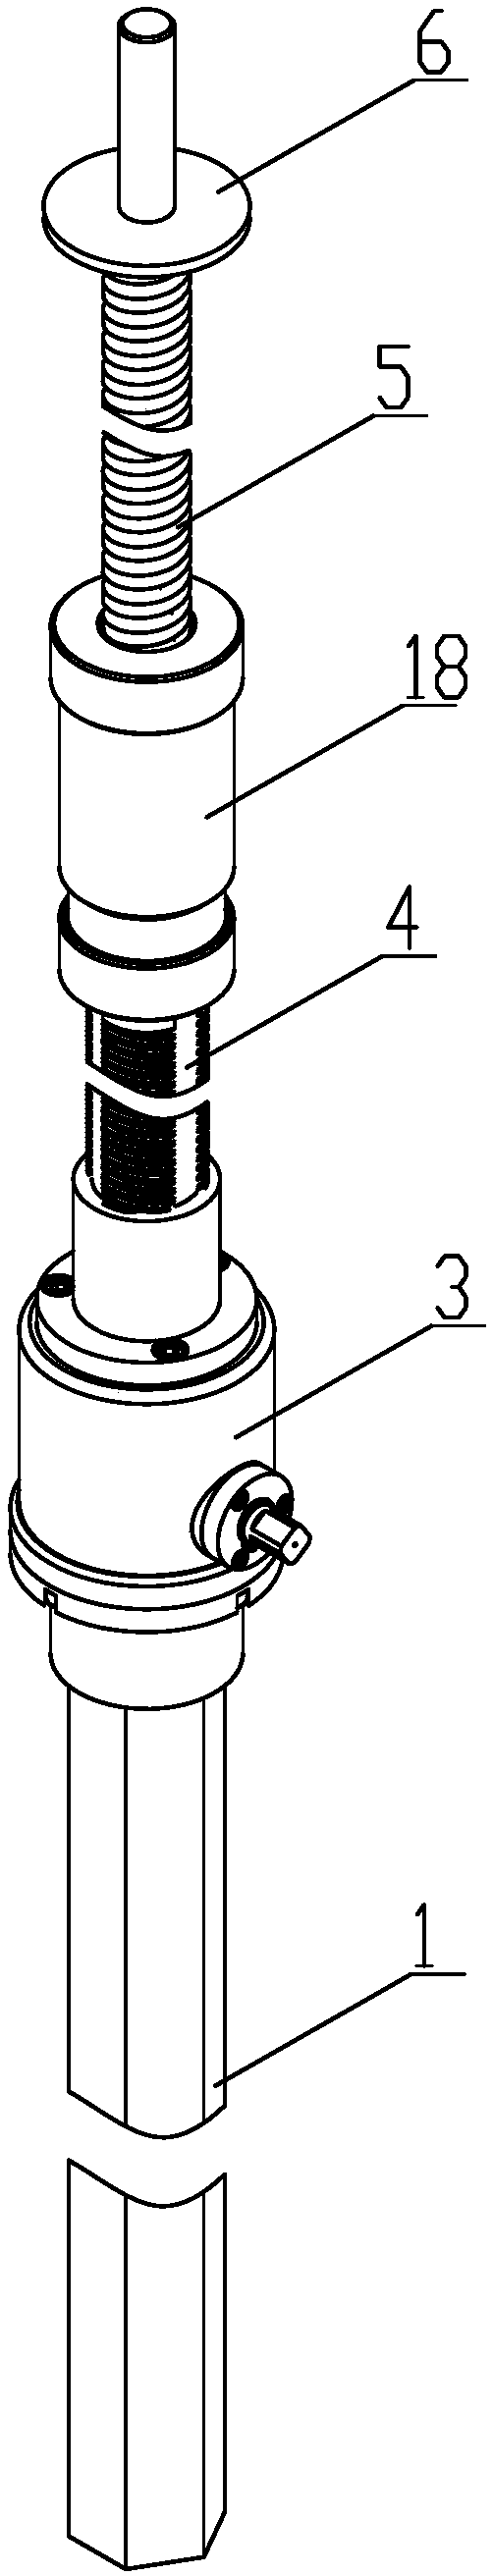 A hollow screw rod double helix device